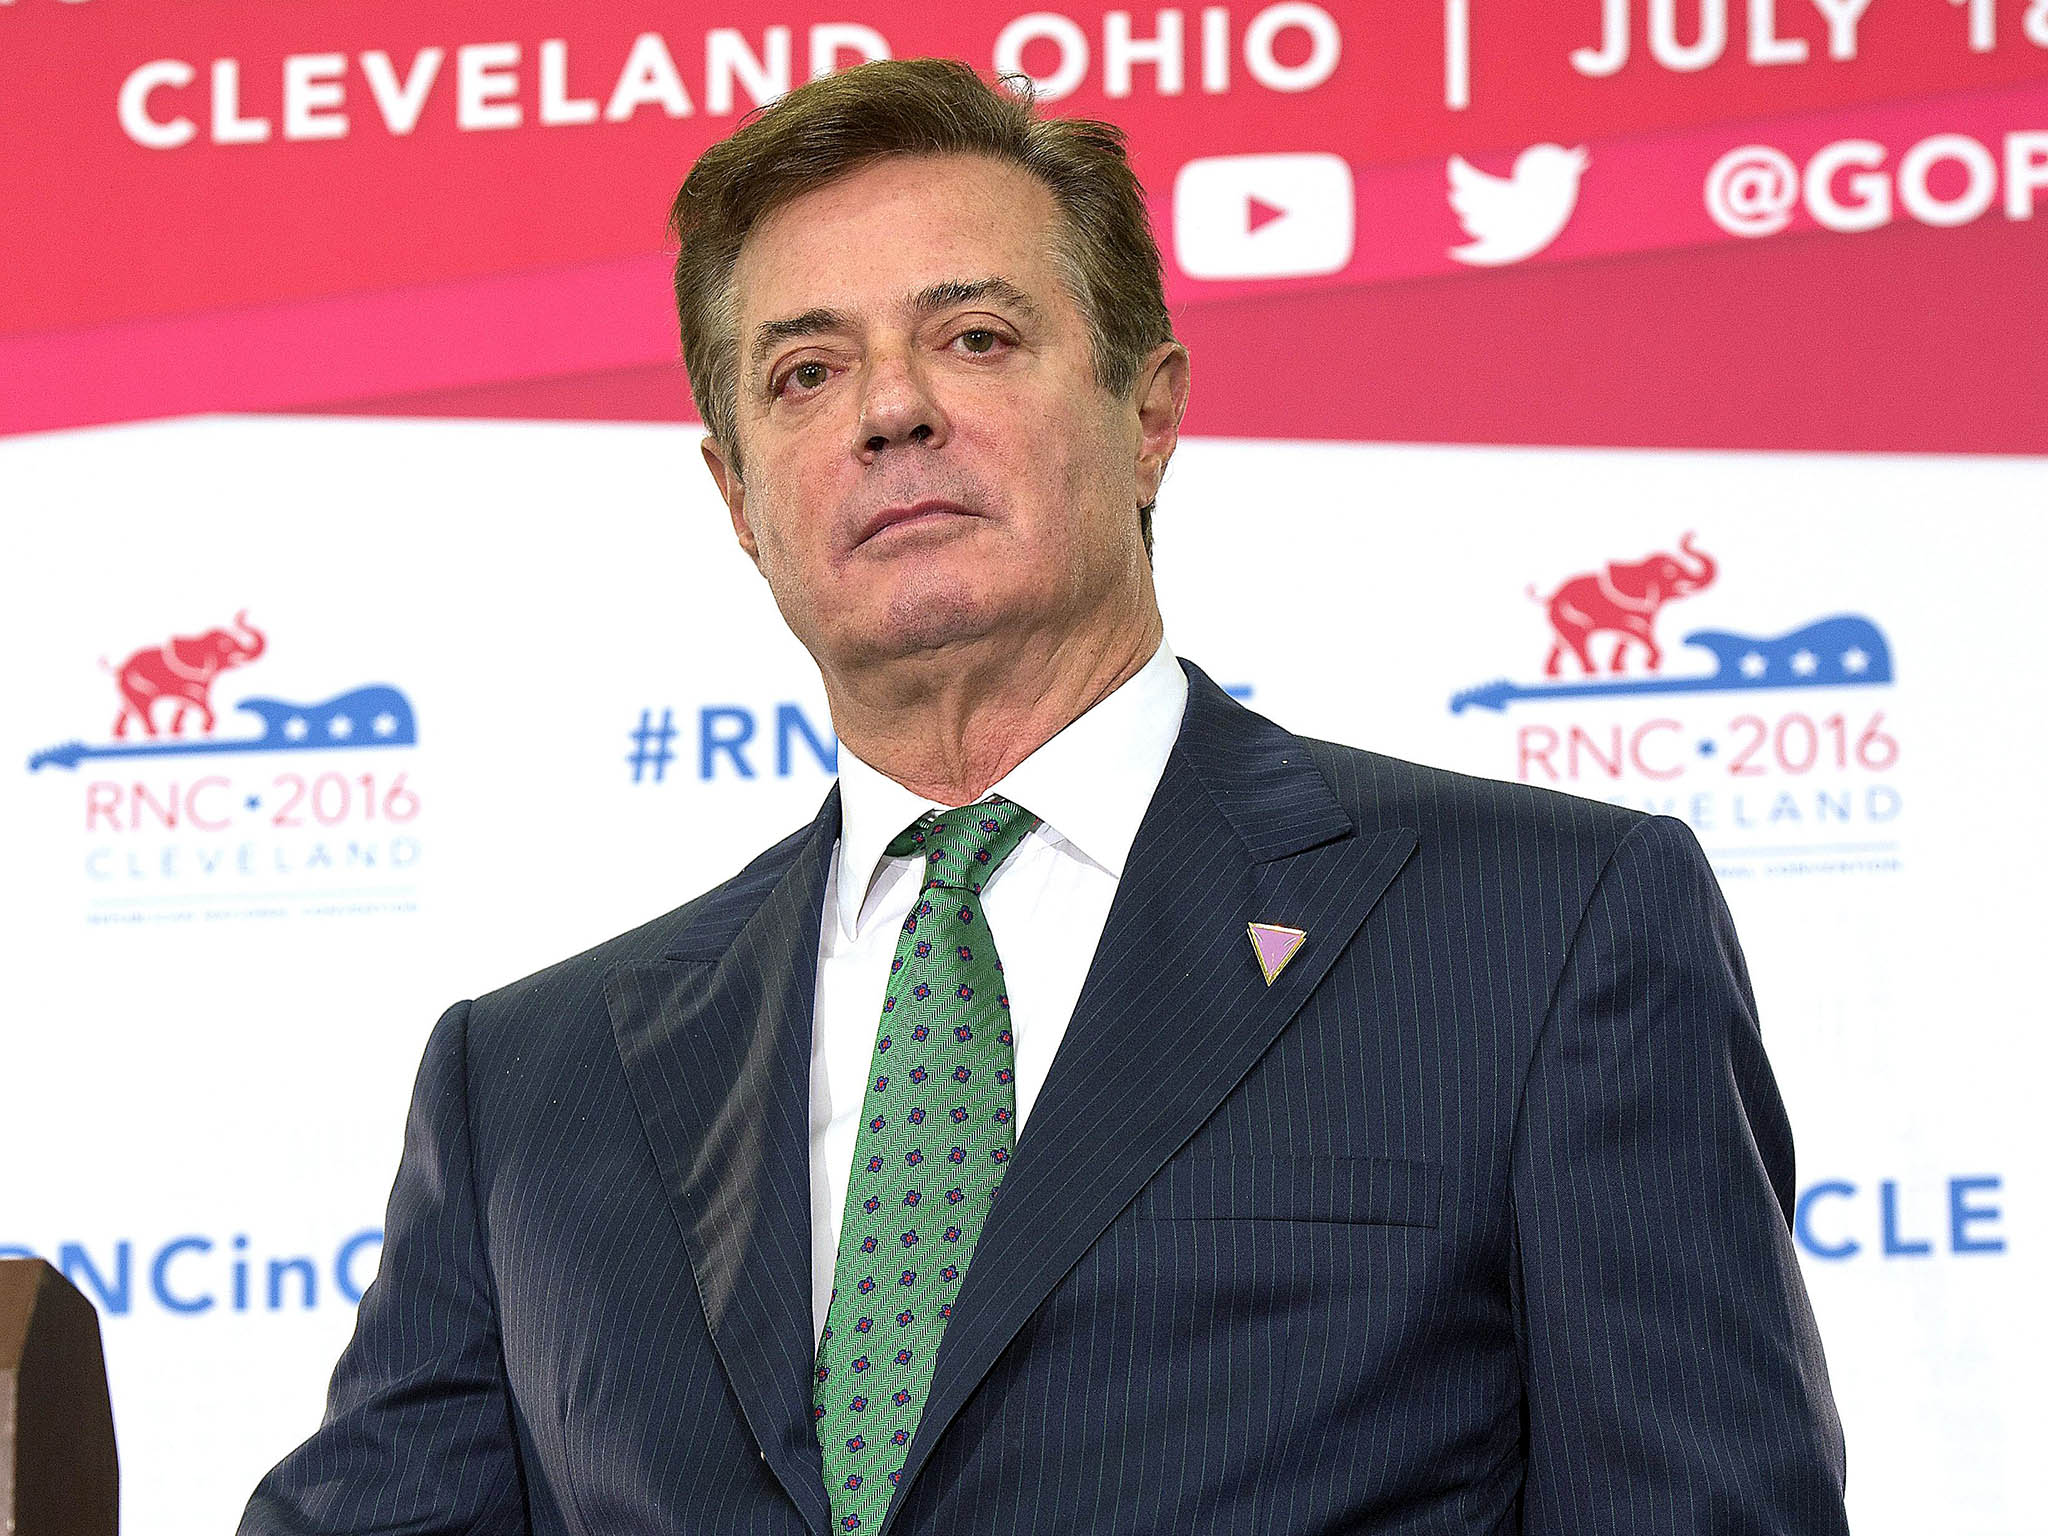 Paul Manafort served as Donald Trump's campaign chairman between June and August 2016